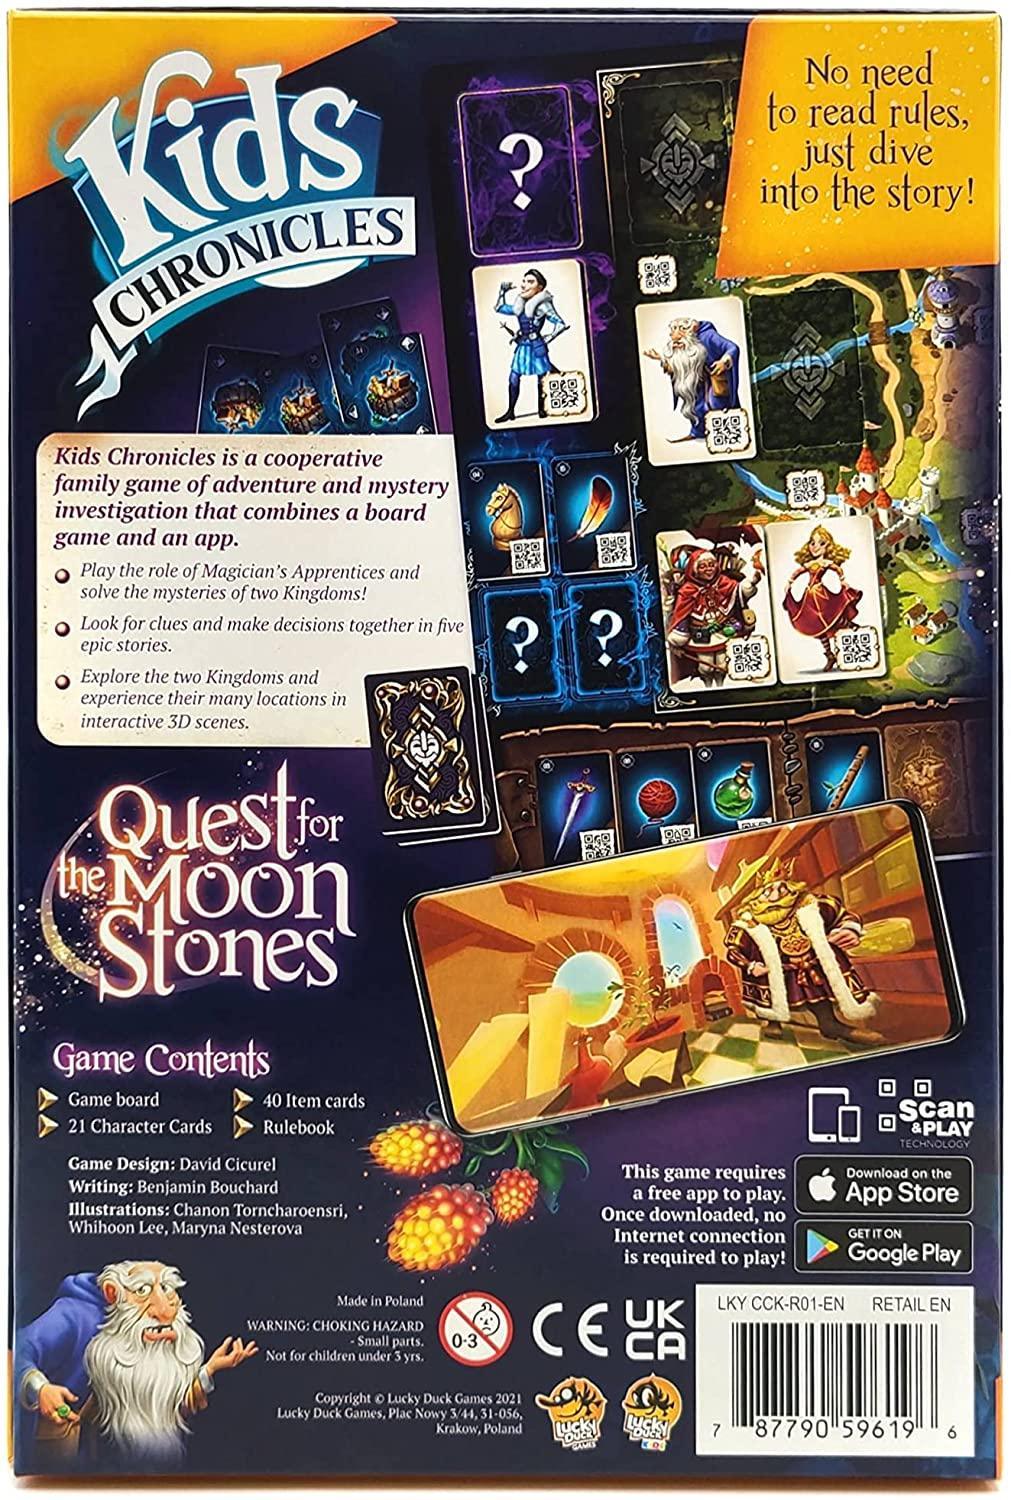 Kids' Chronicles: Quest for the Moon Stones